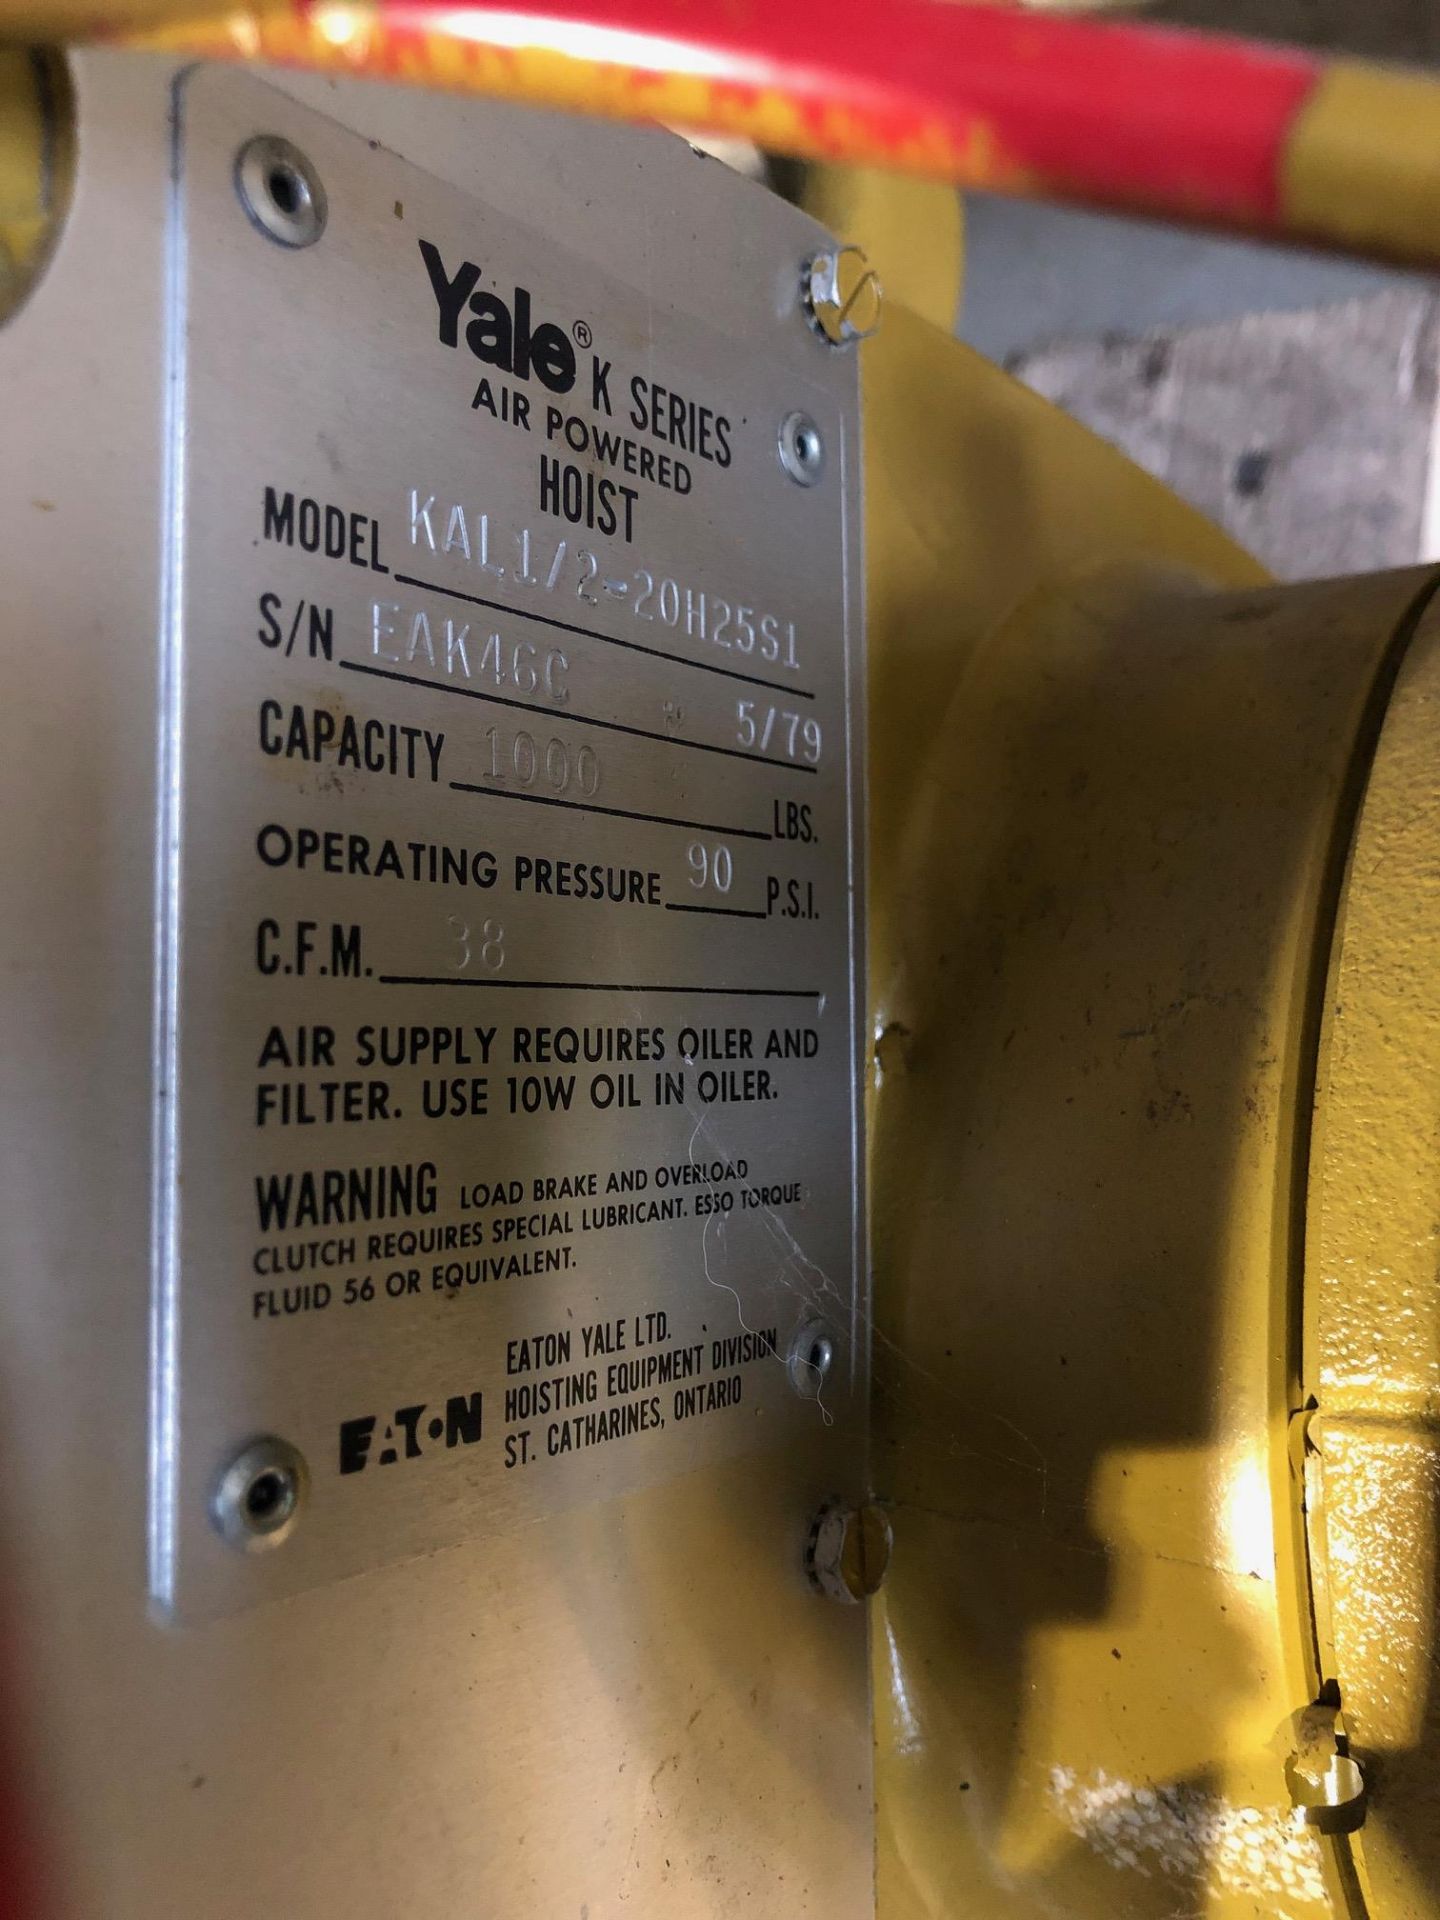 YALE AIR POWERED HOIST MOD. KAL 1/2-20H25S1, S/N: EAK46C, 1000 LBS, 115 VOLTS ** LOCATED IN WEST- - Image 3 of 3